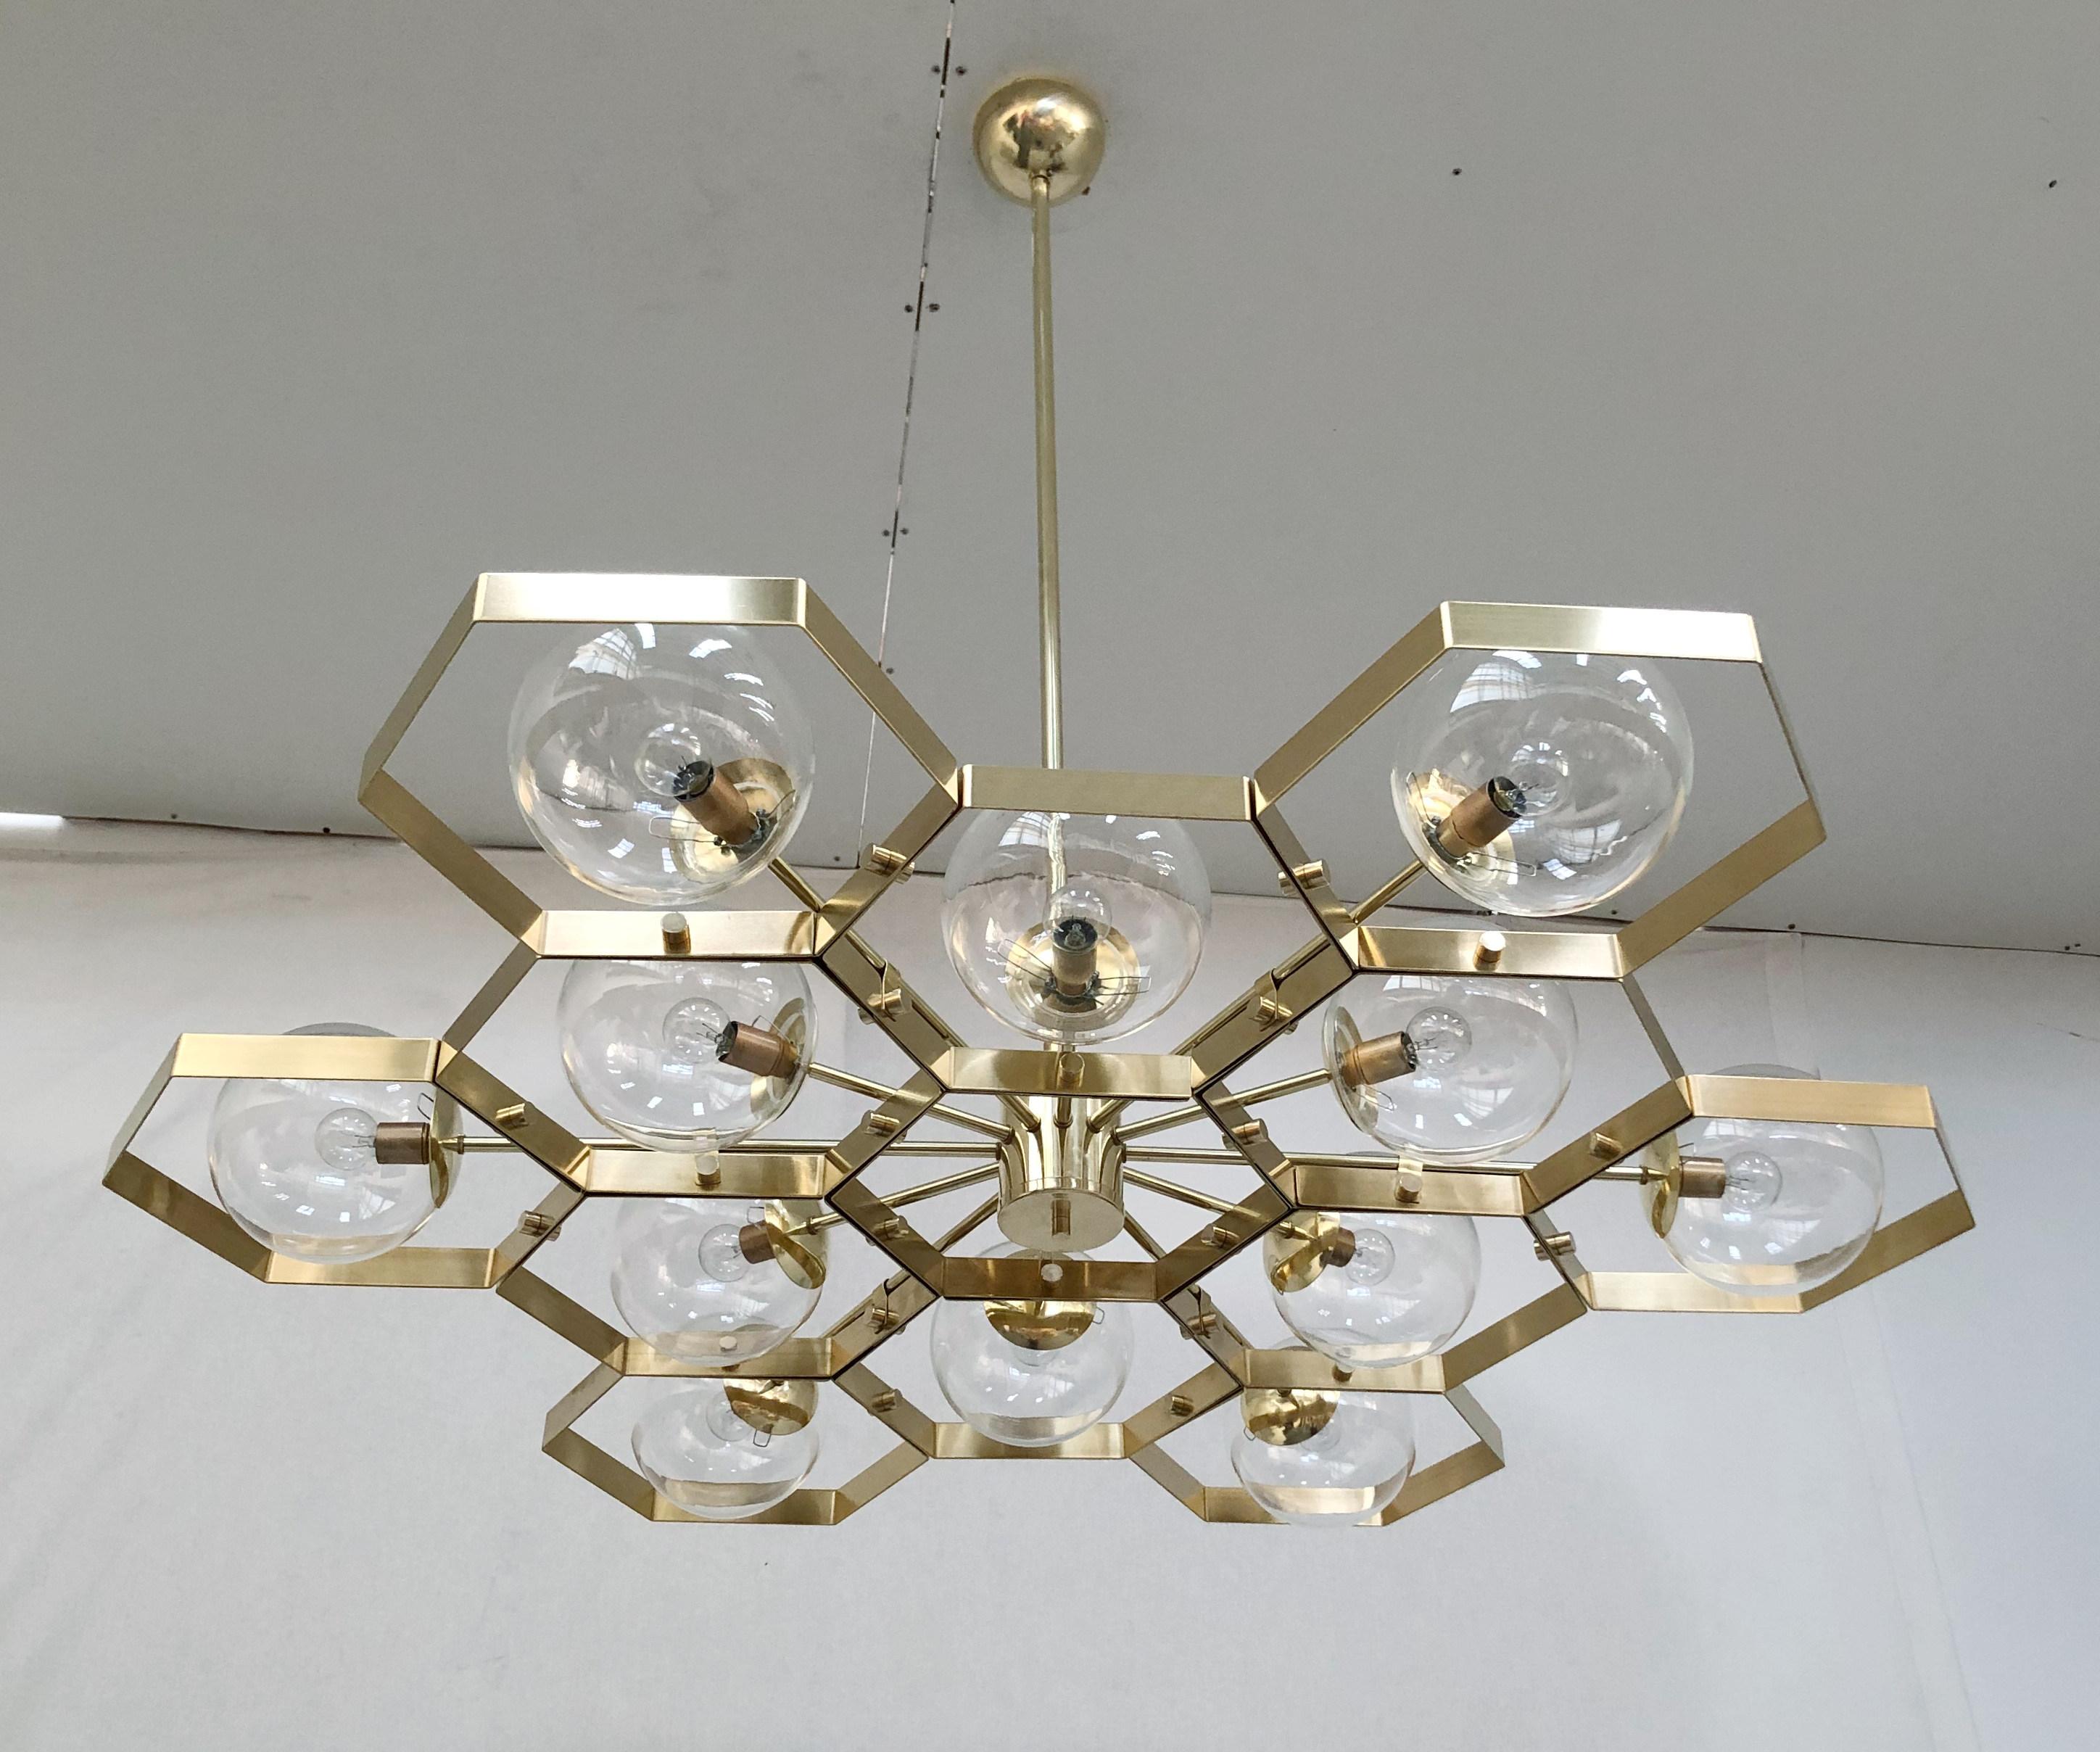 Italian modern chandelier with Murano glass globes, mounted on unlacquered brass frame / designed by Fabio Bergomi for Fabio Ltd, made in Italy
Measures: Diameter 47 inches, height 45 inches with rod and canopy
12 lights / E12 or E14 type / max 40W